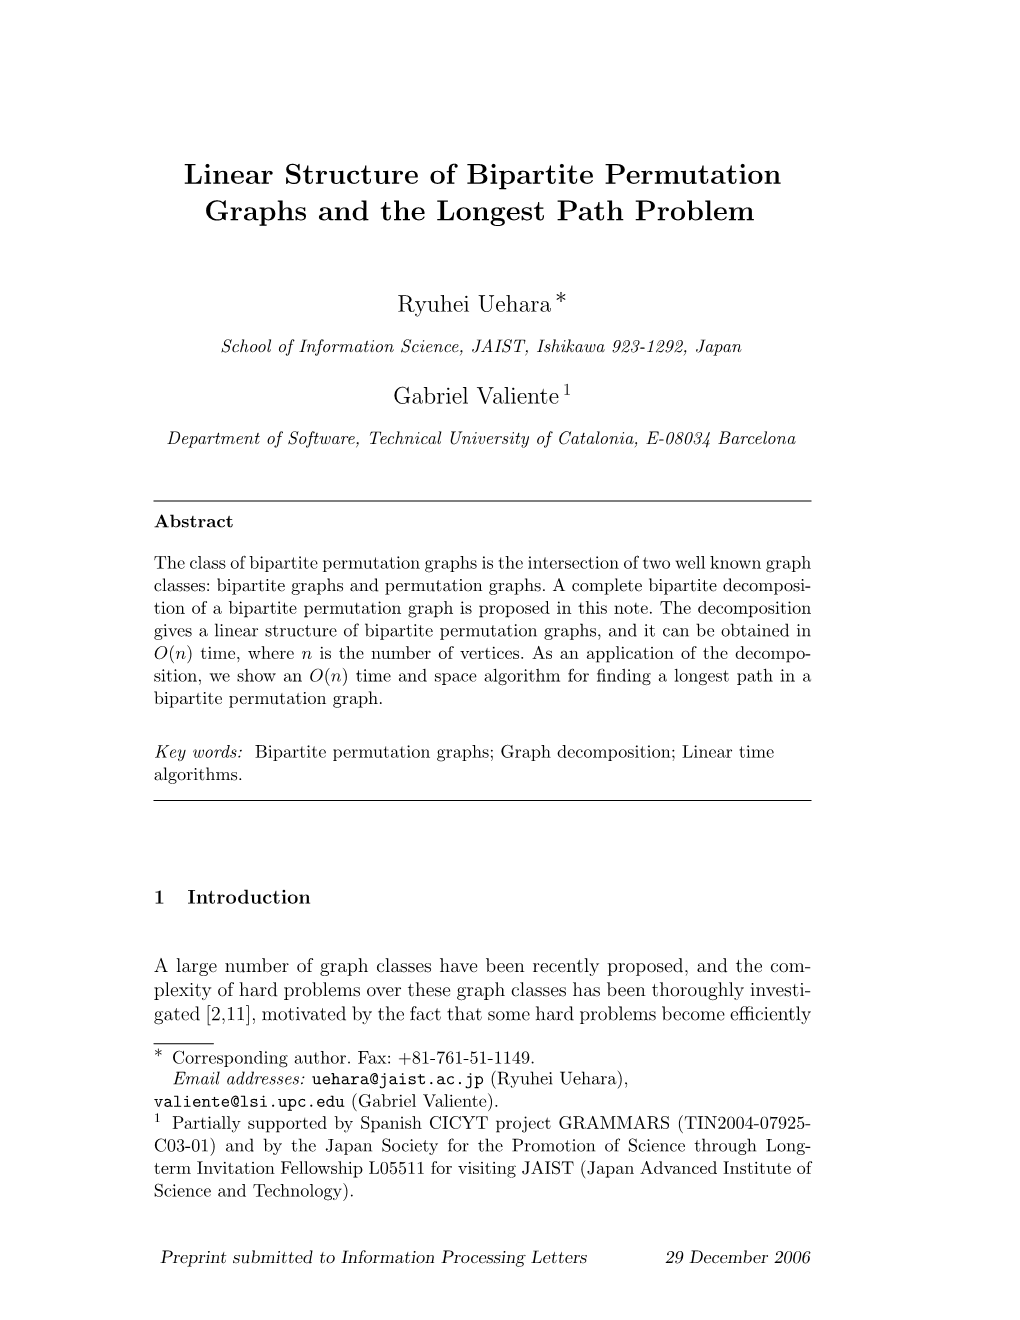 Linear Structure of Bipartite Permutation Graphs and the Longest Path Problem